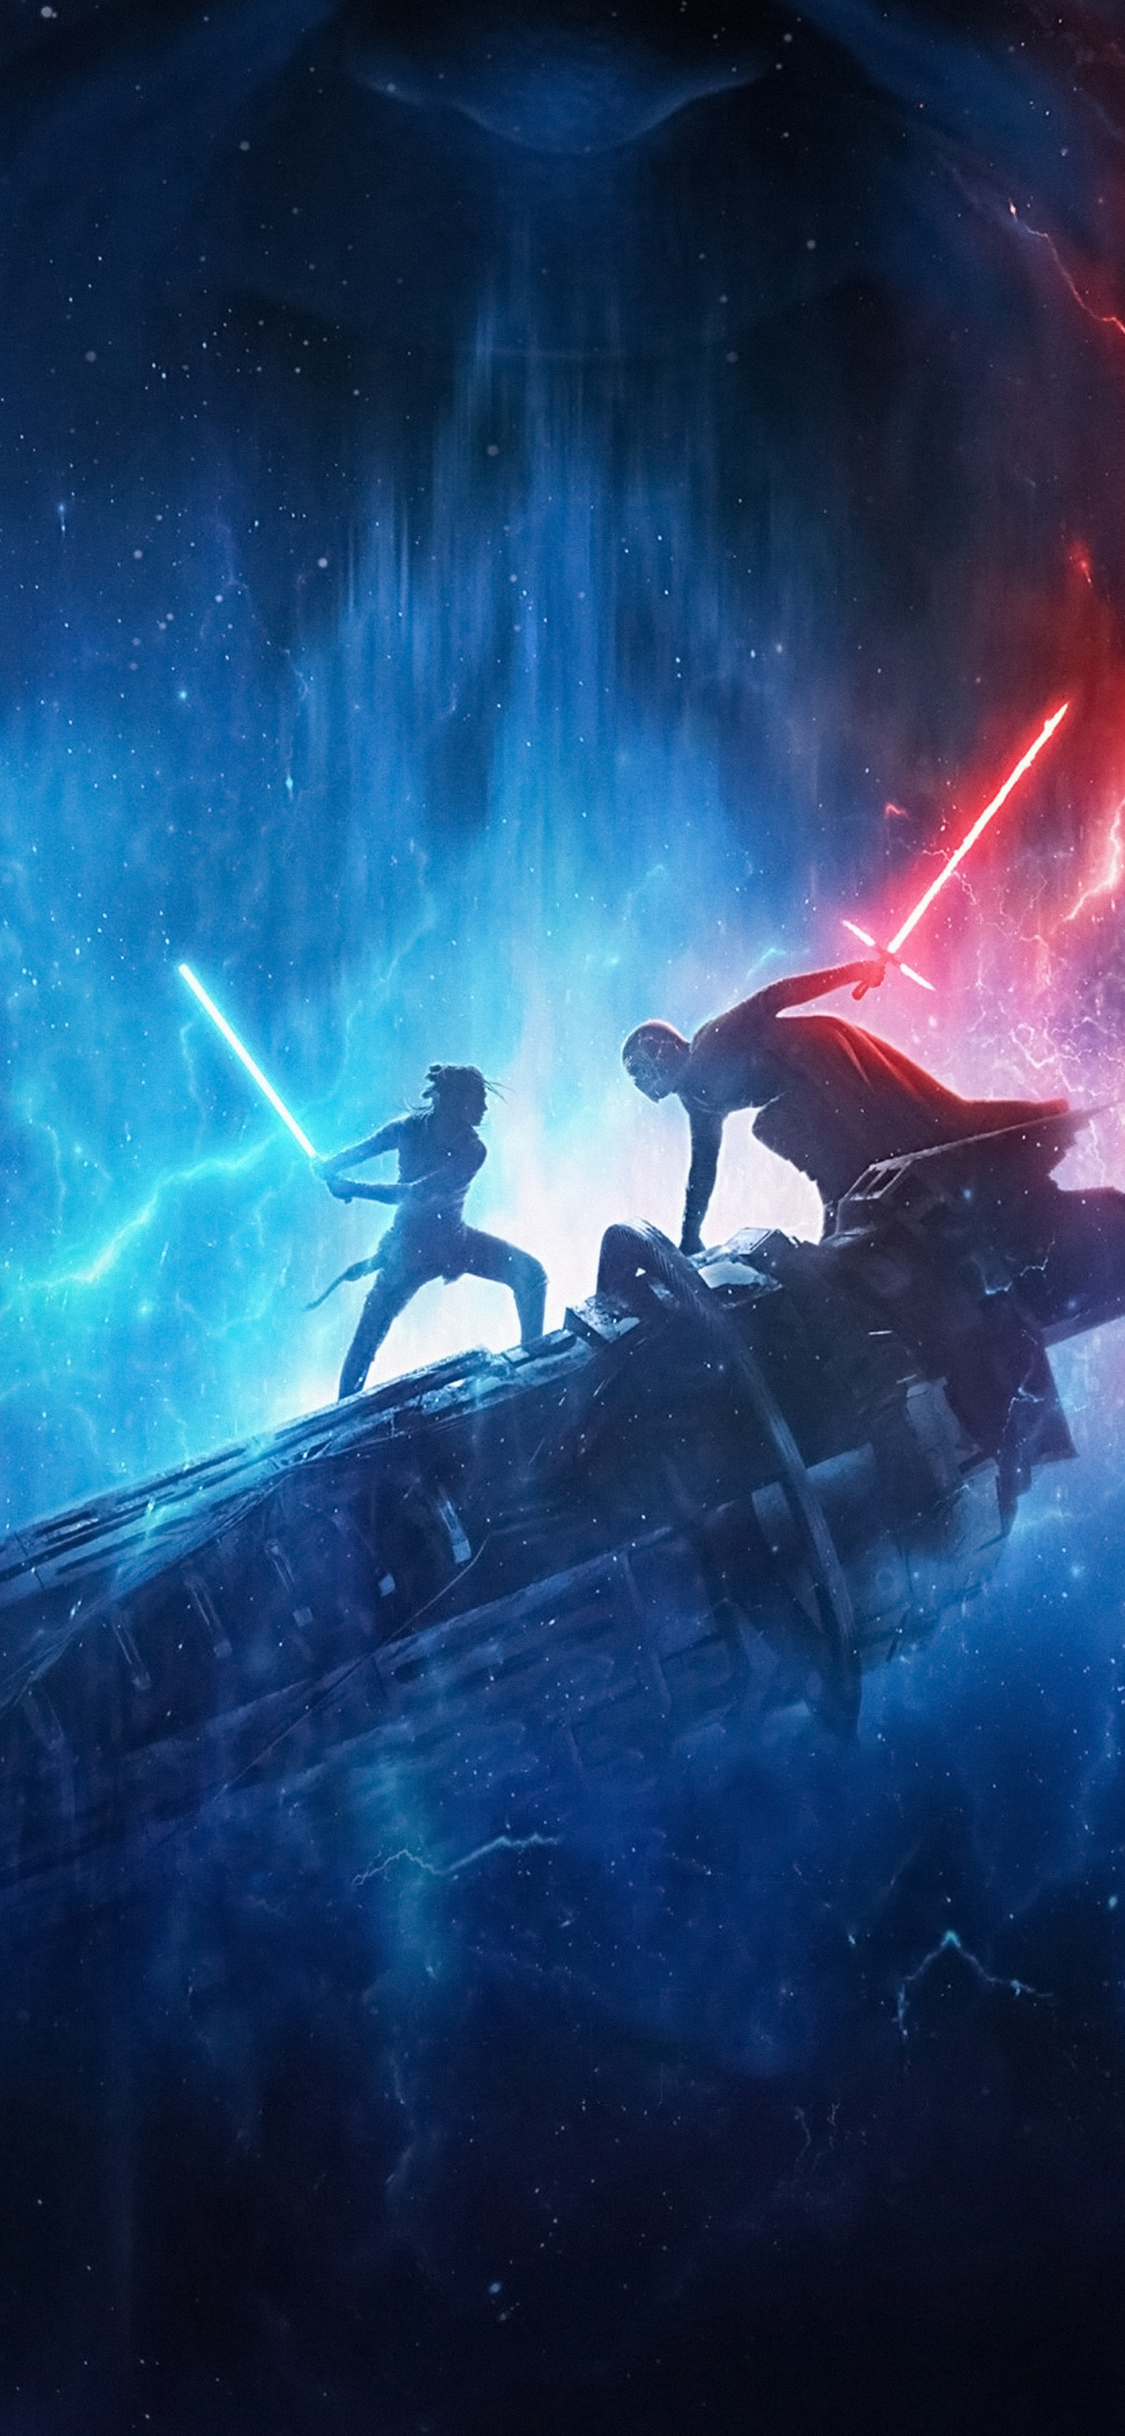 Download 1125x2436 Wallpaper Star Wars The Rise Of